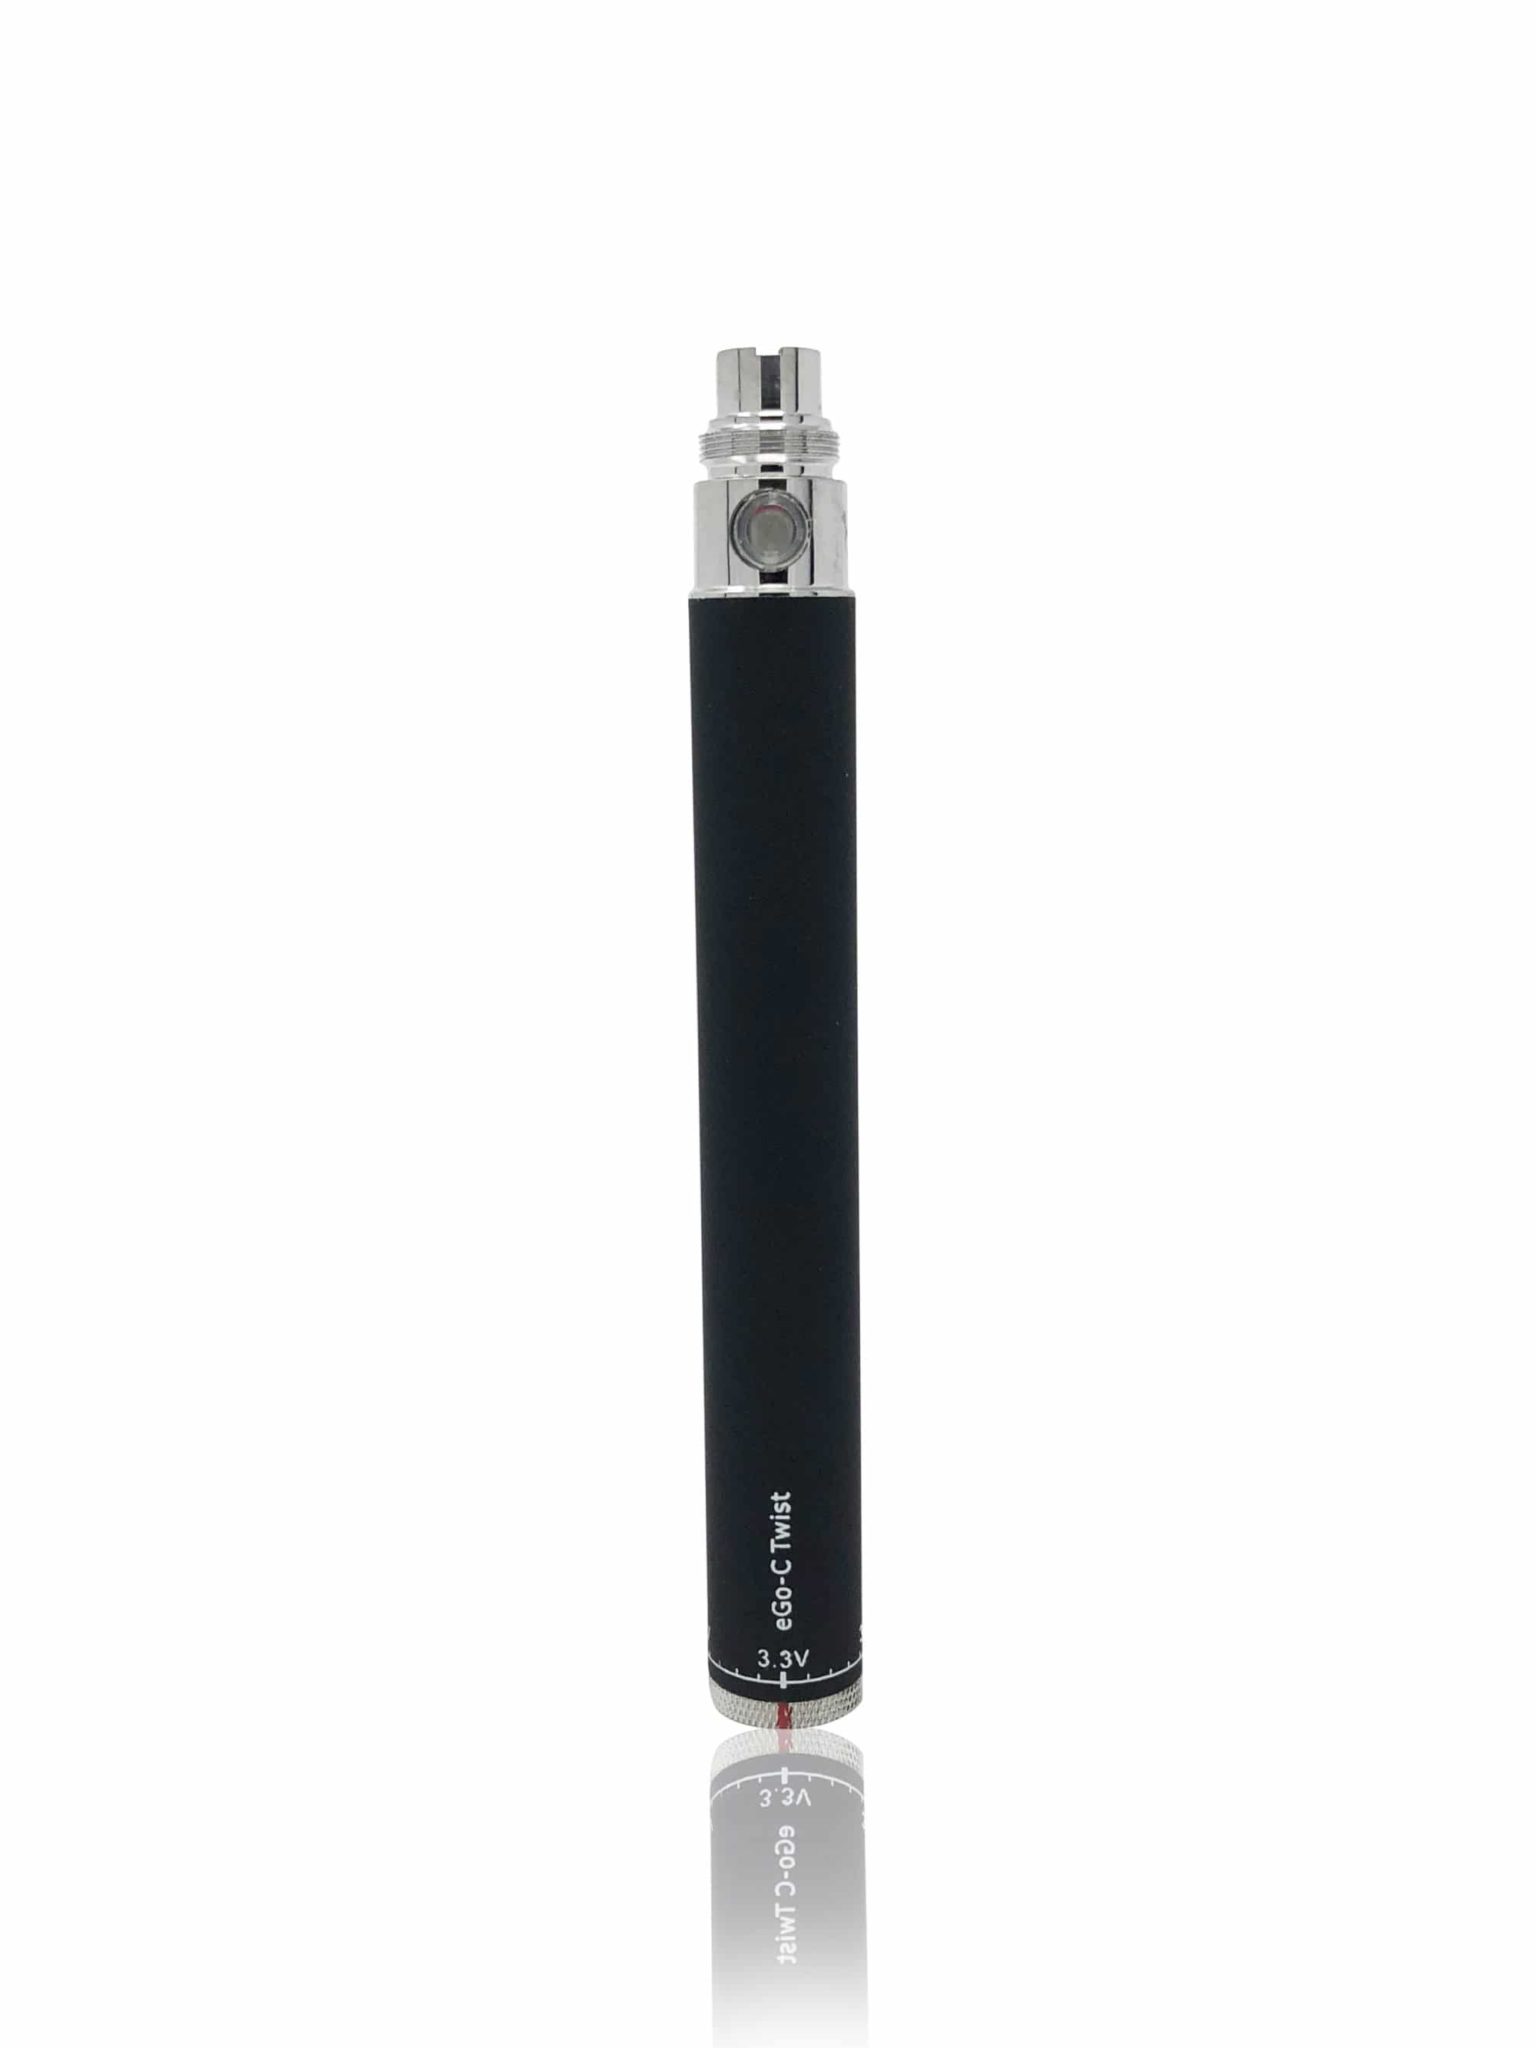 Ego-C Twist 1100 mah Variable Voltage Battery with Charger-510 BATTERY-No Limit Distro